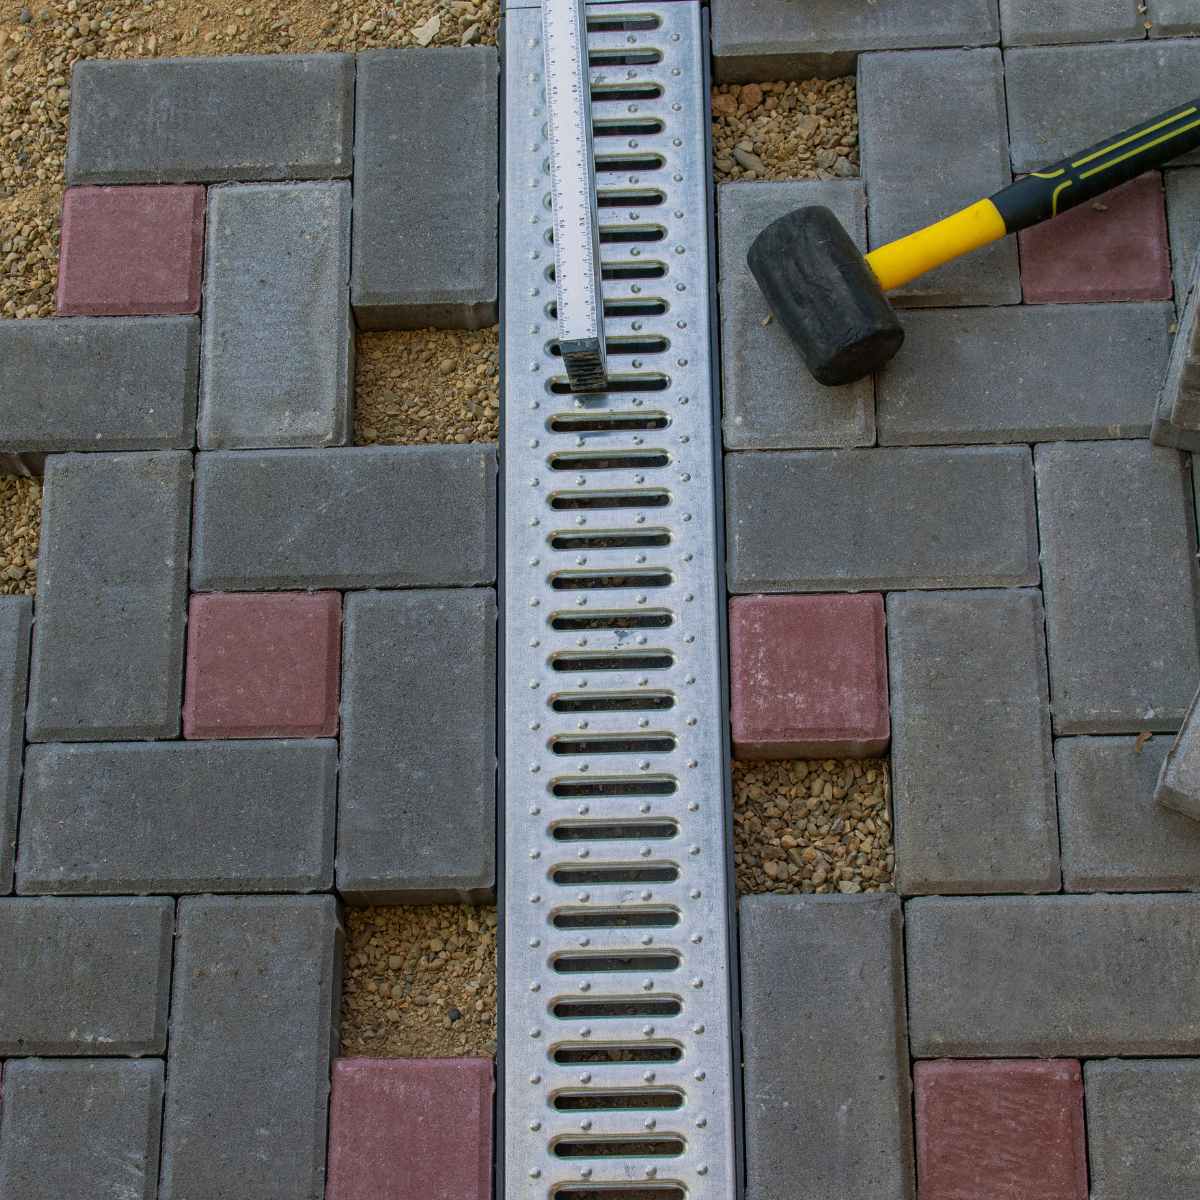 How to Fit a Paving Drainage System